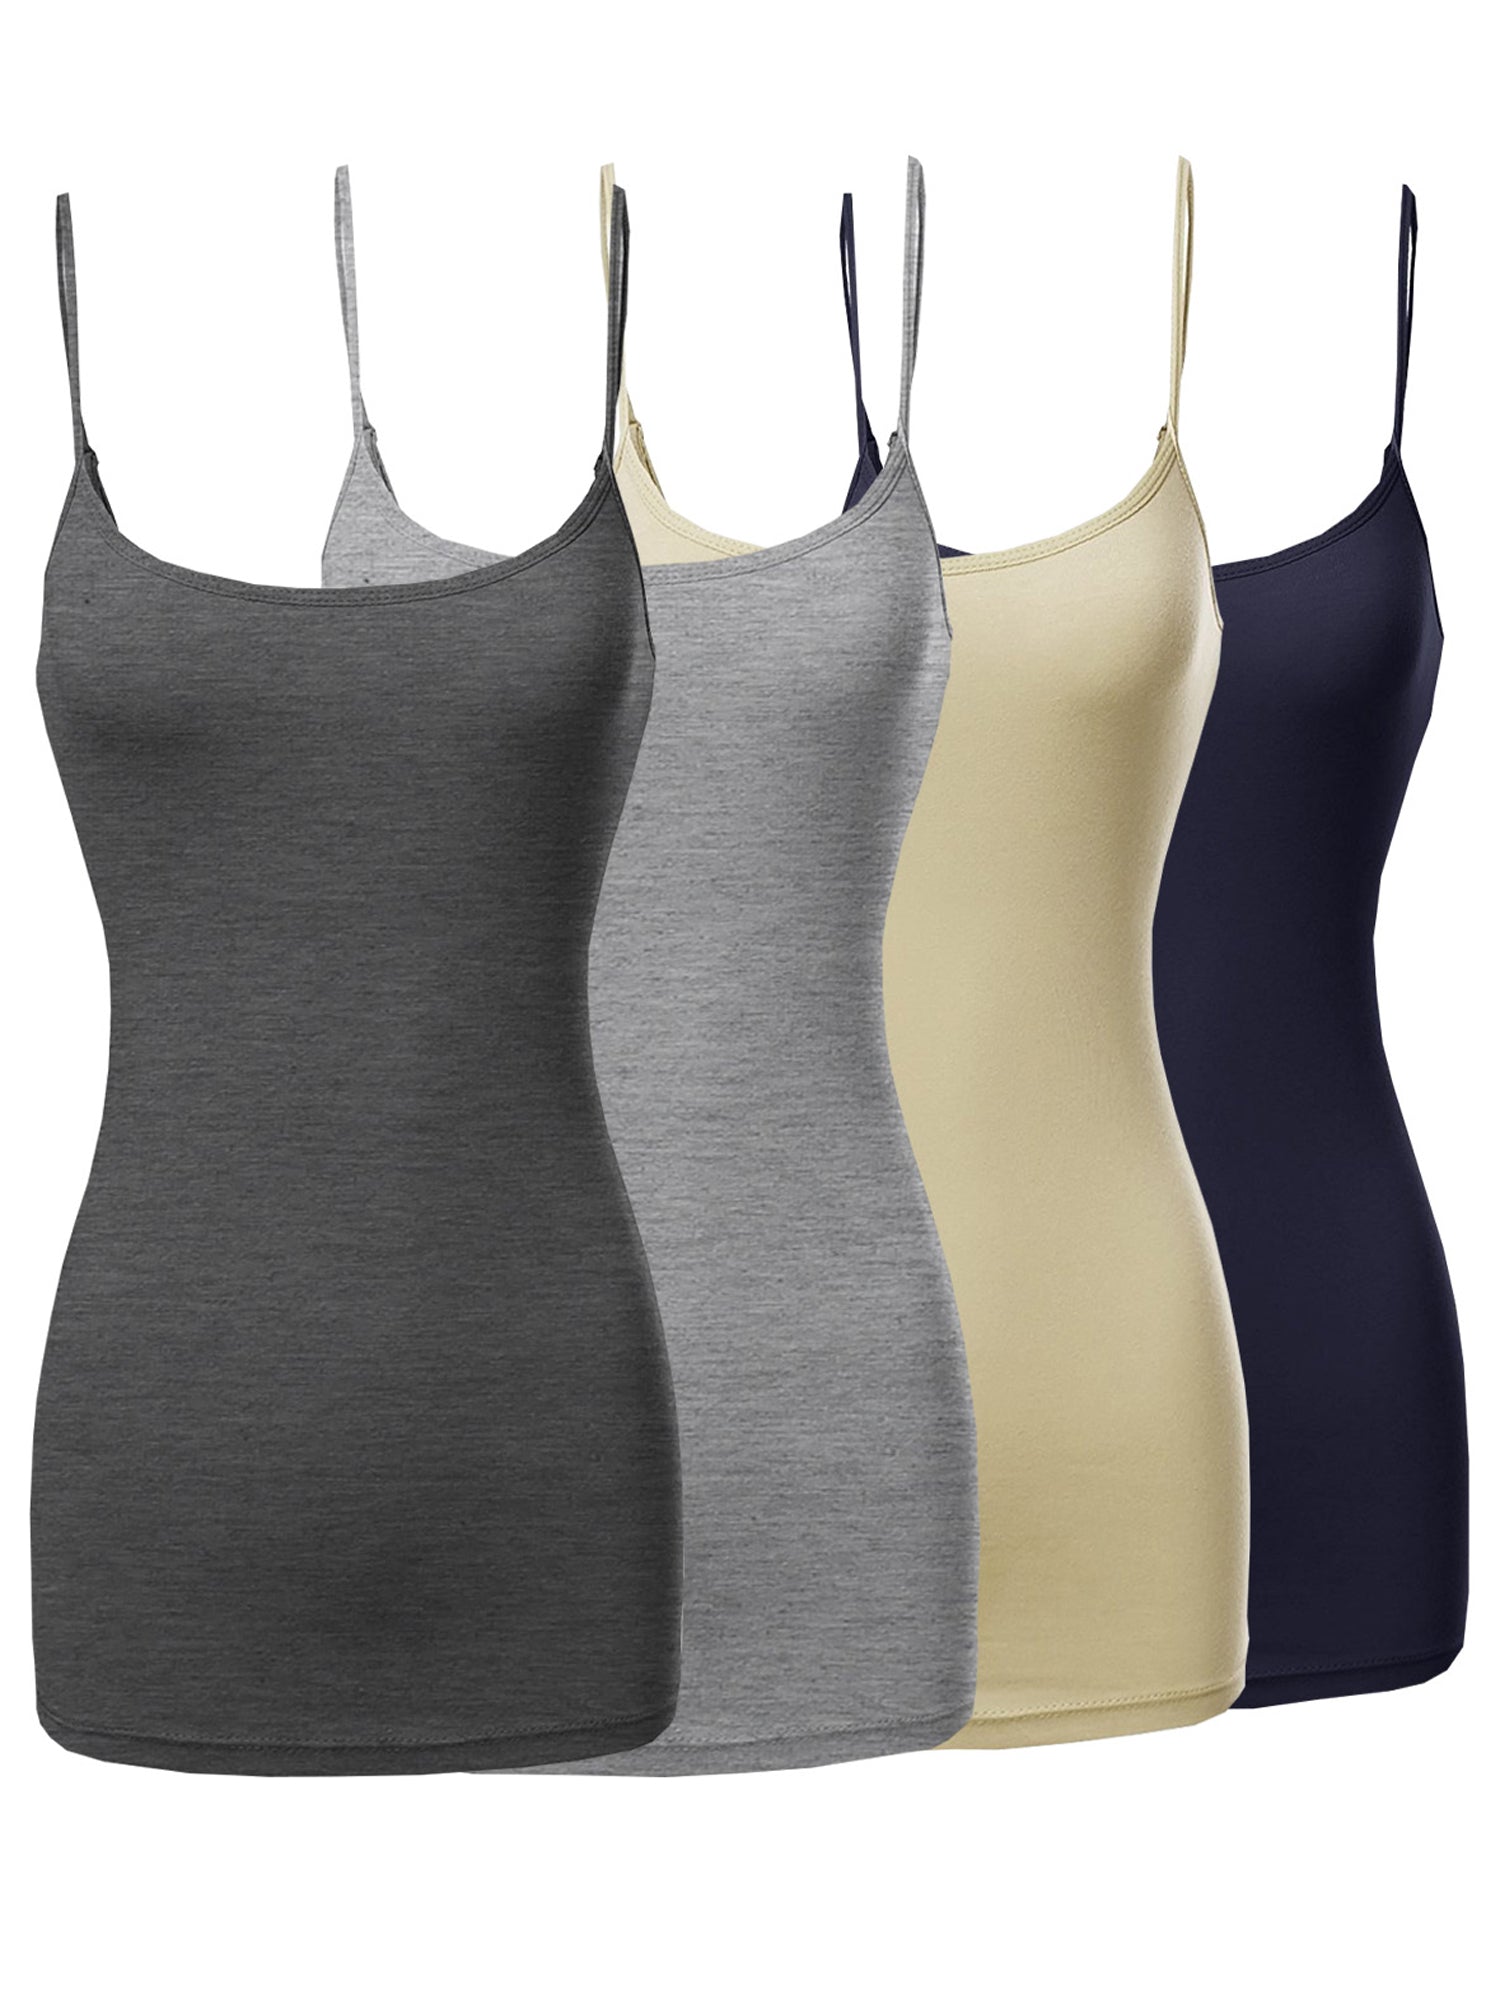 Essential Basic Women Value Pack Long Camisole Cami - Black, Black,  Charcoal, Charcoal, Small